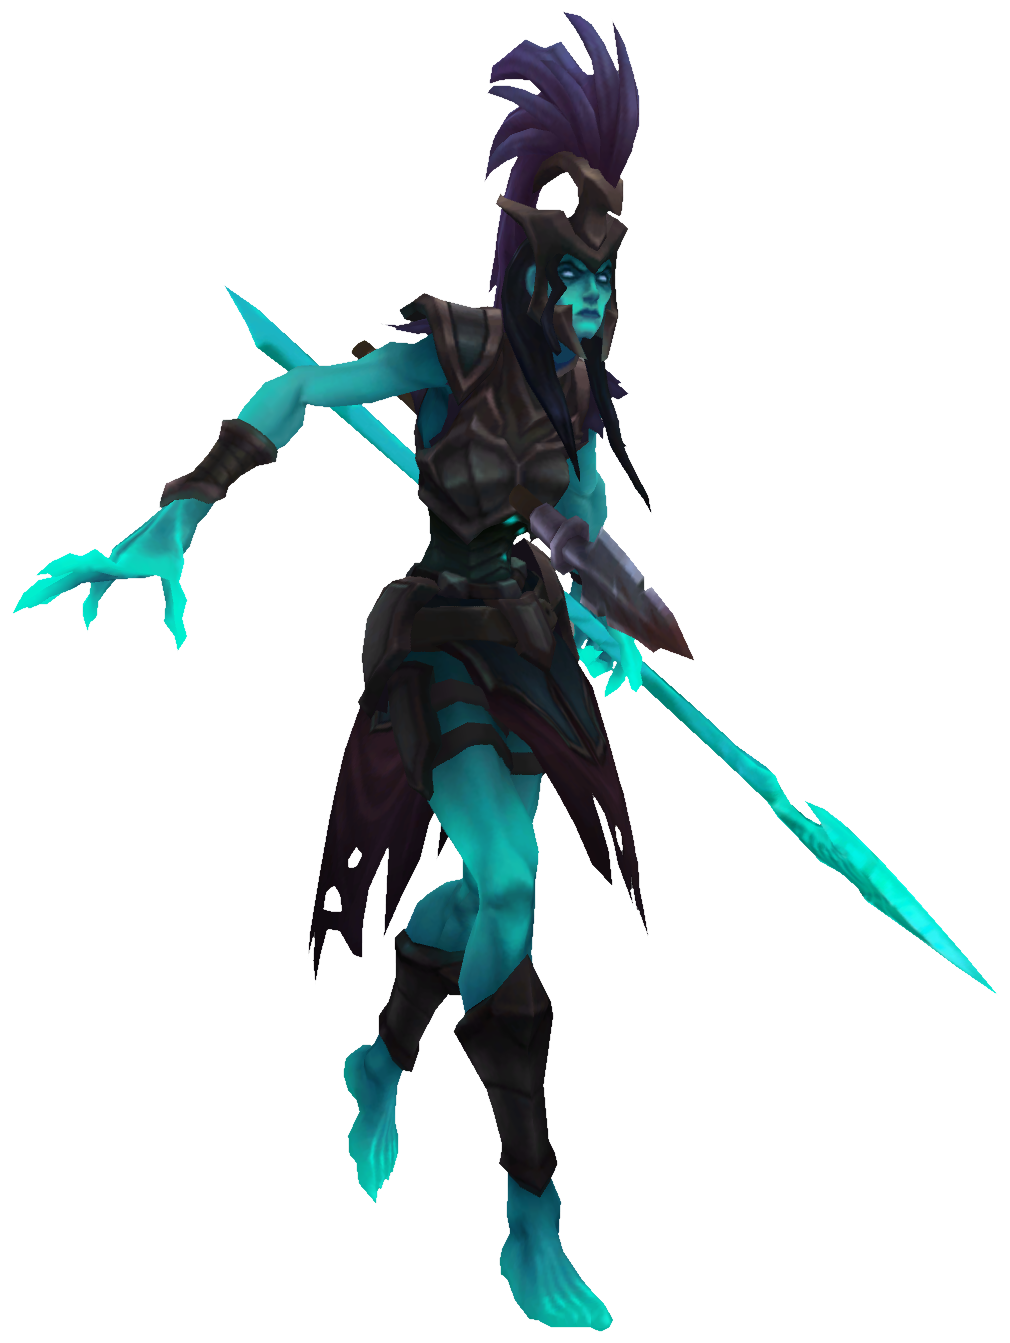 Kalista Background League Of Legends Wiki Champions Items Strategies And Many More